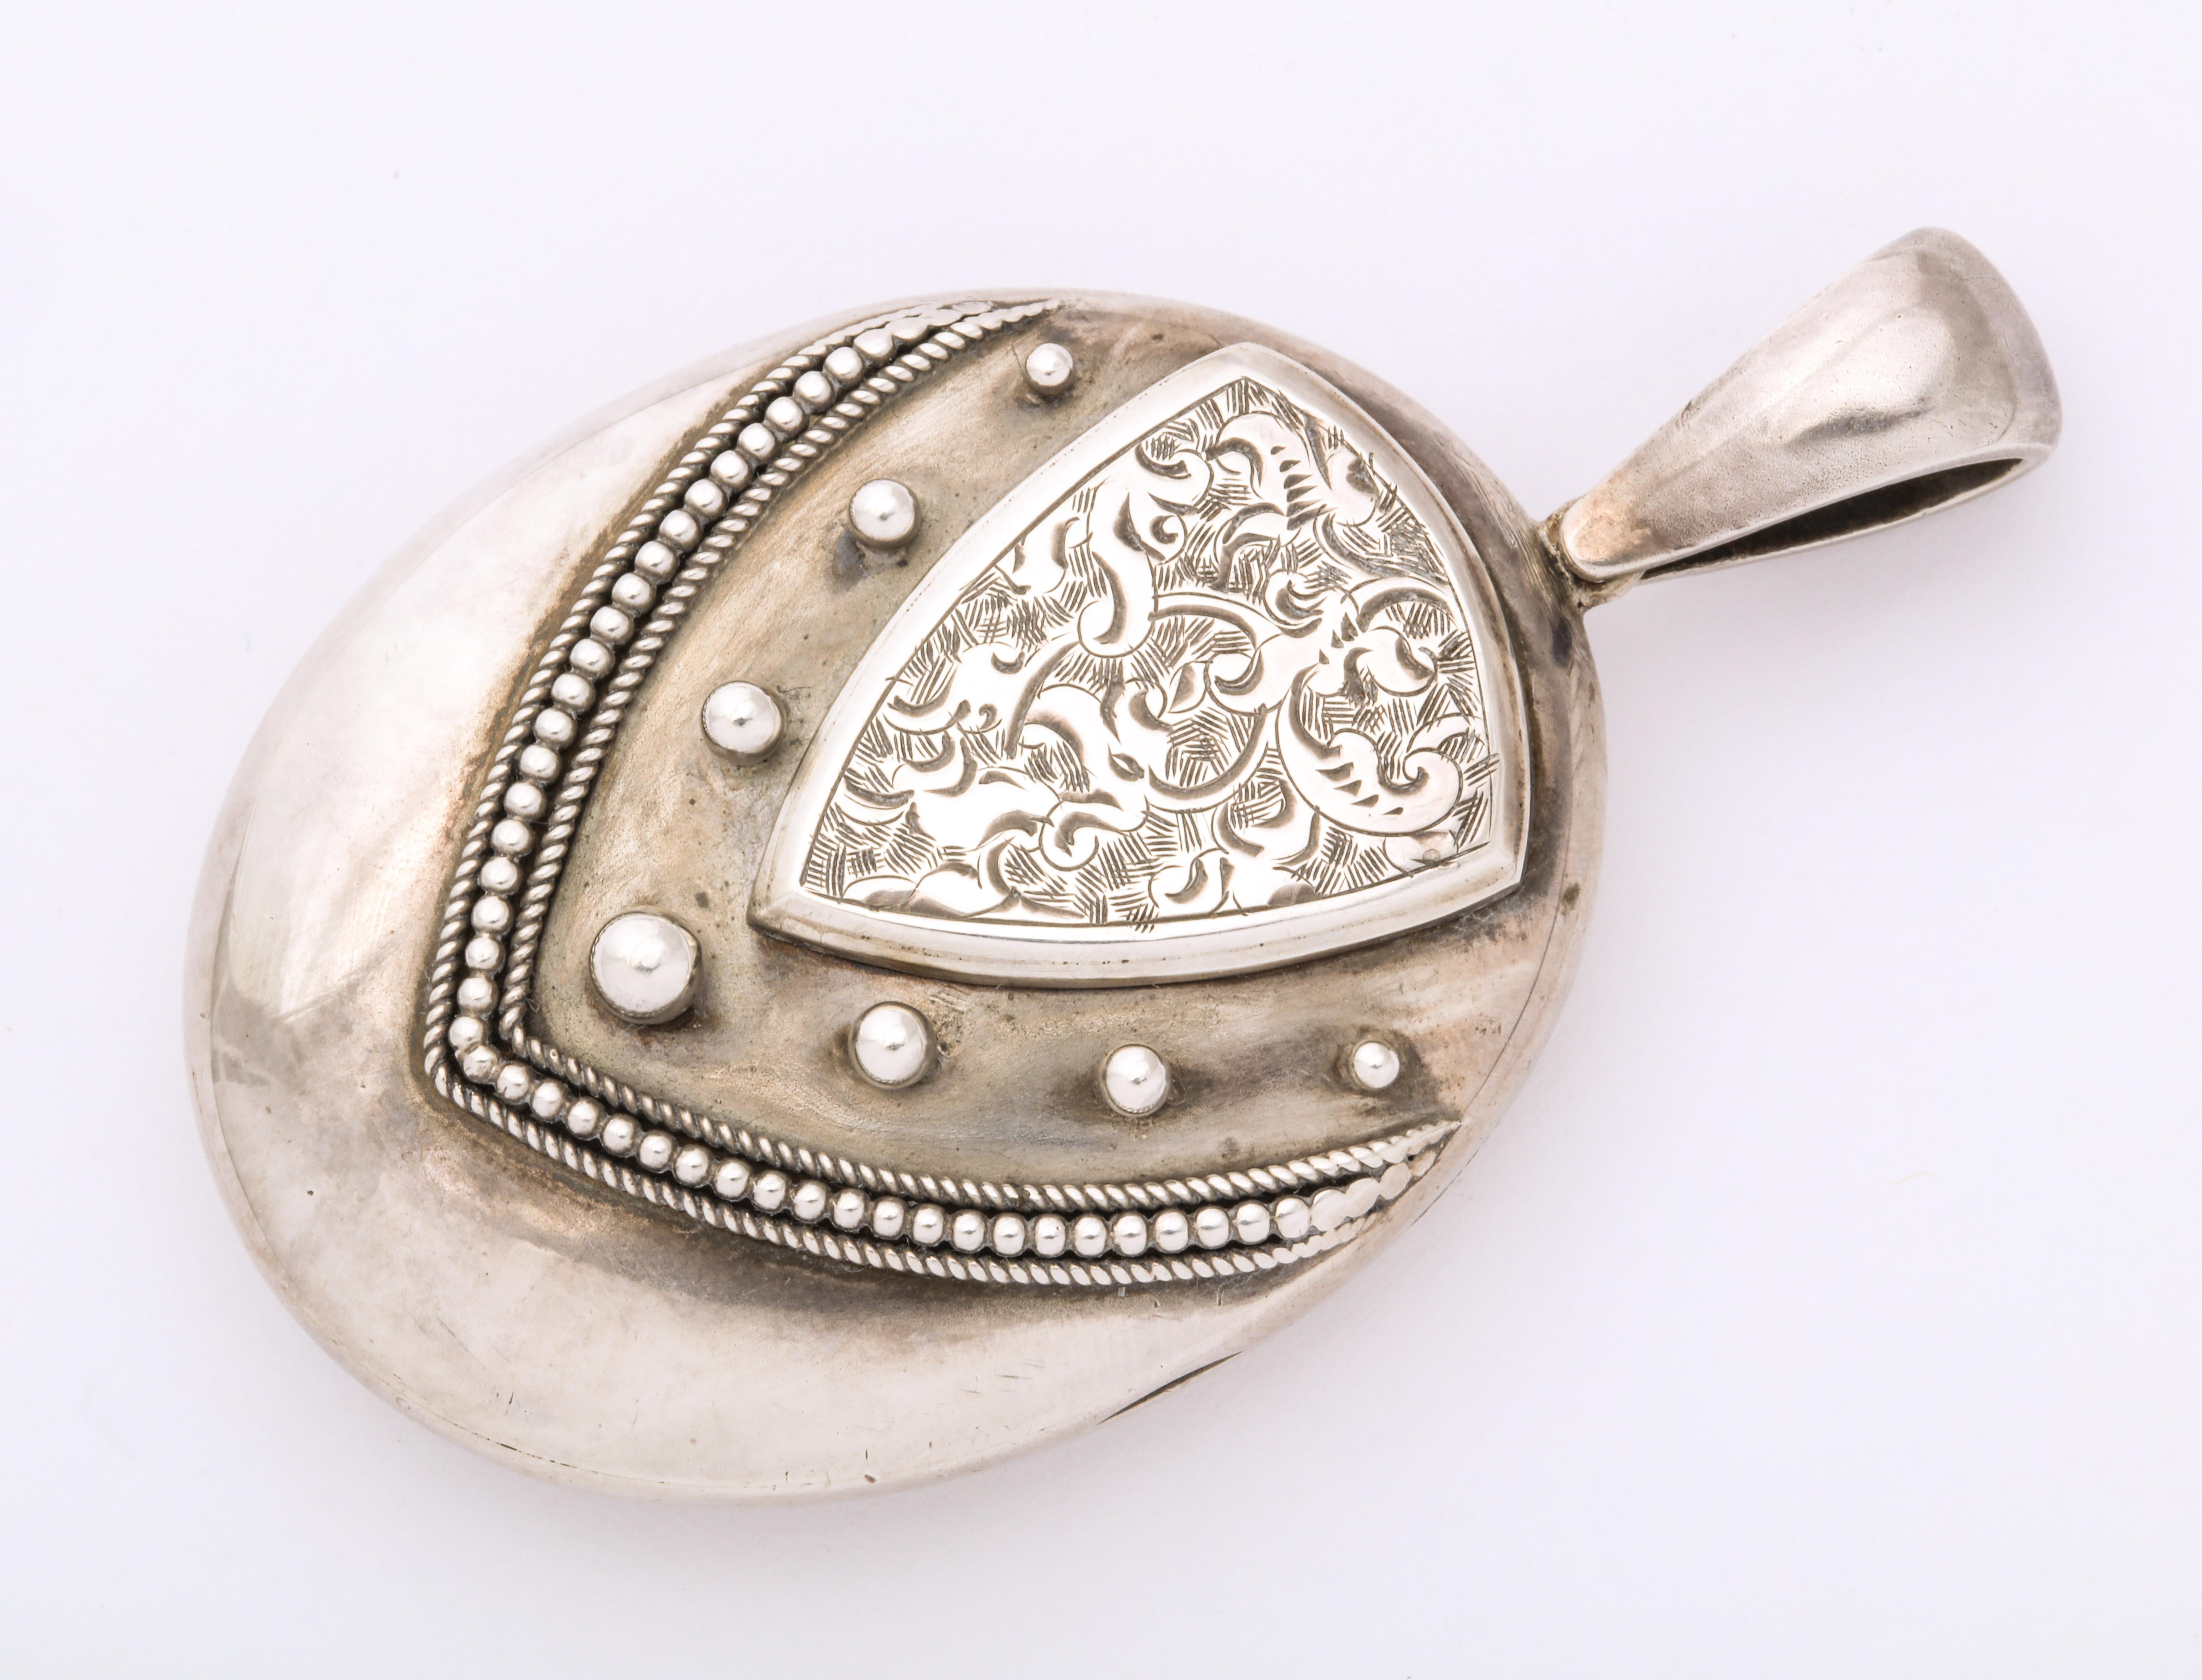 Contrasts of smooth and frilly engraving make an unusual shield design on this Victorian Silver Locket c. 1860-1880. The shield shape at top is covered with abstract vines atop a larger shield of raised silver graduated orbs, bordered by silver